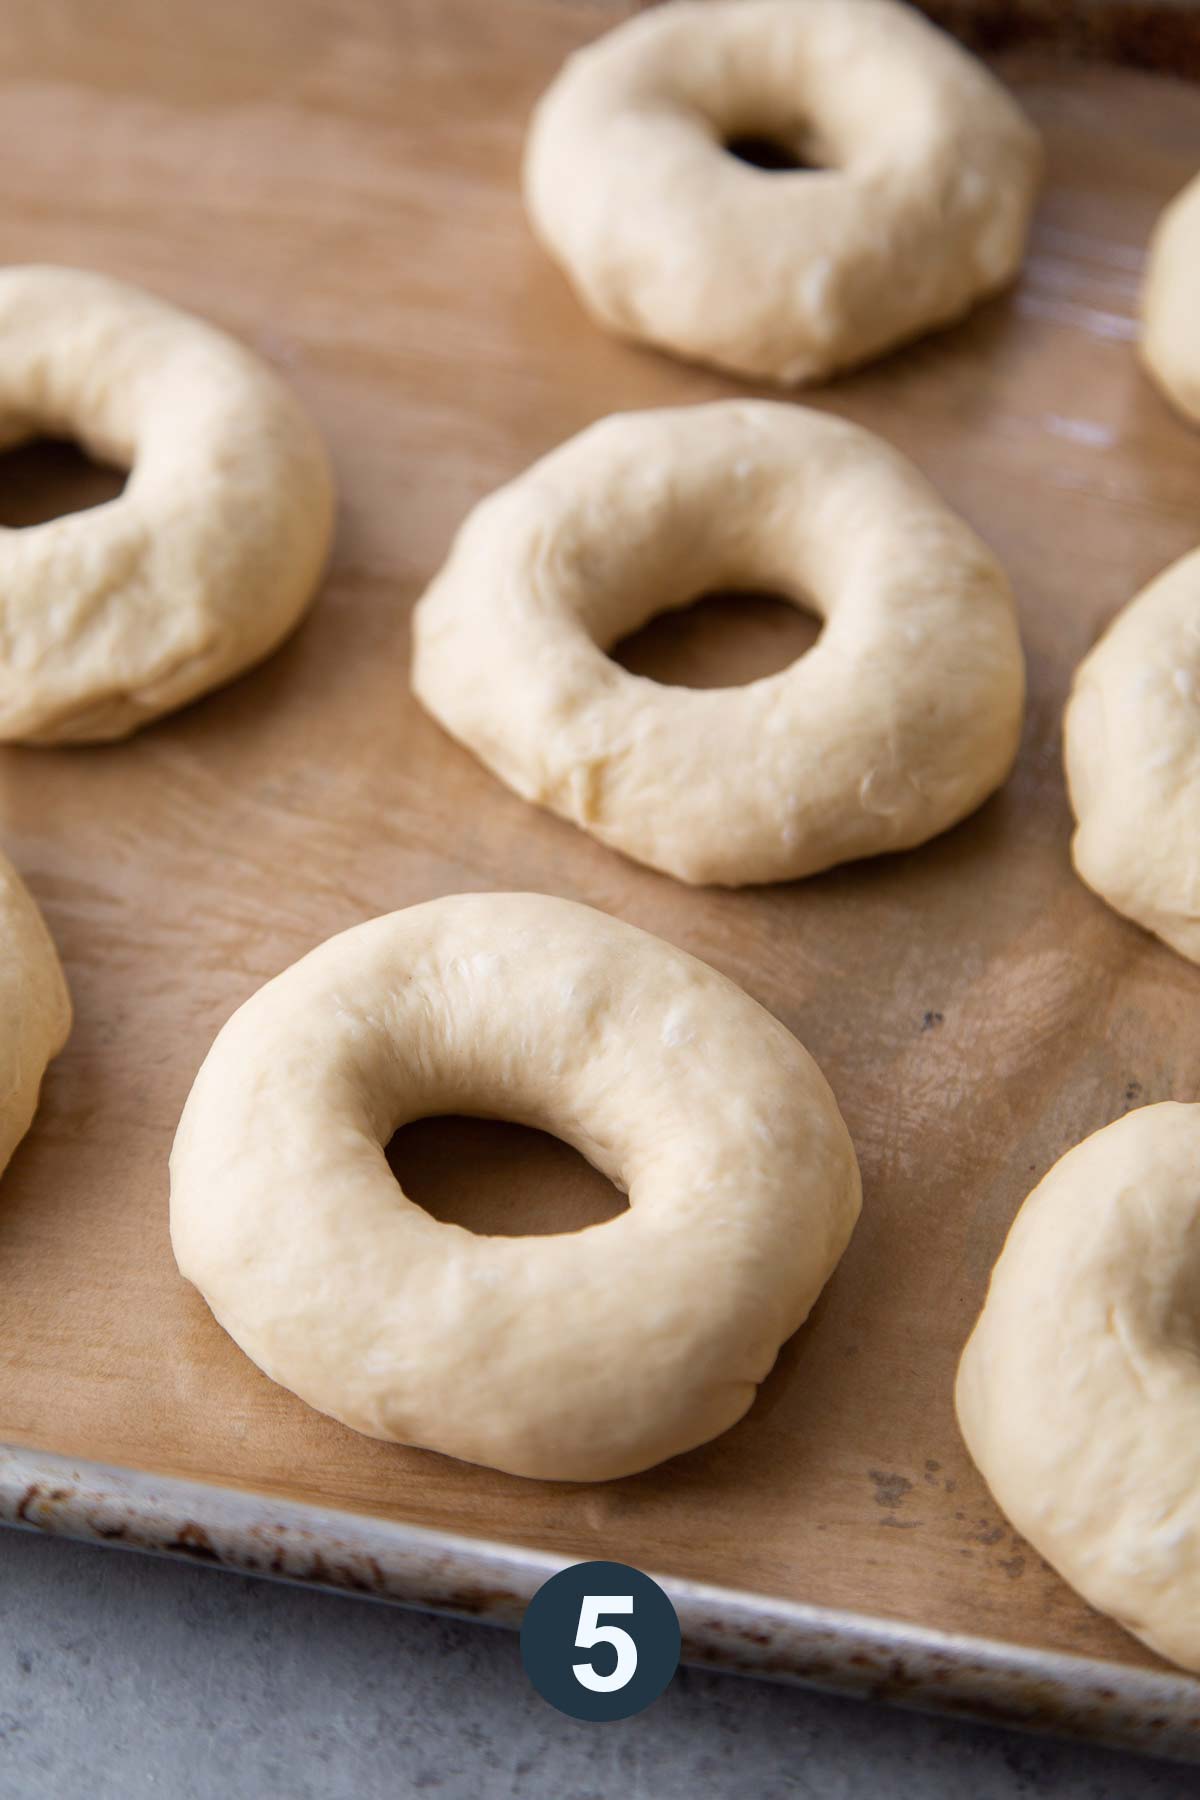 mist bagels with oil and rest overnight.